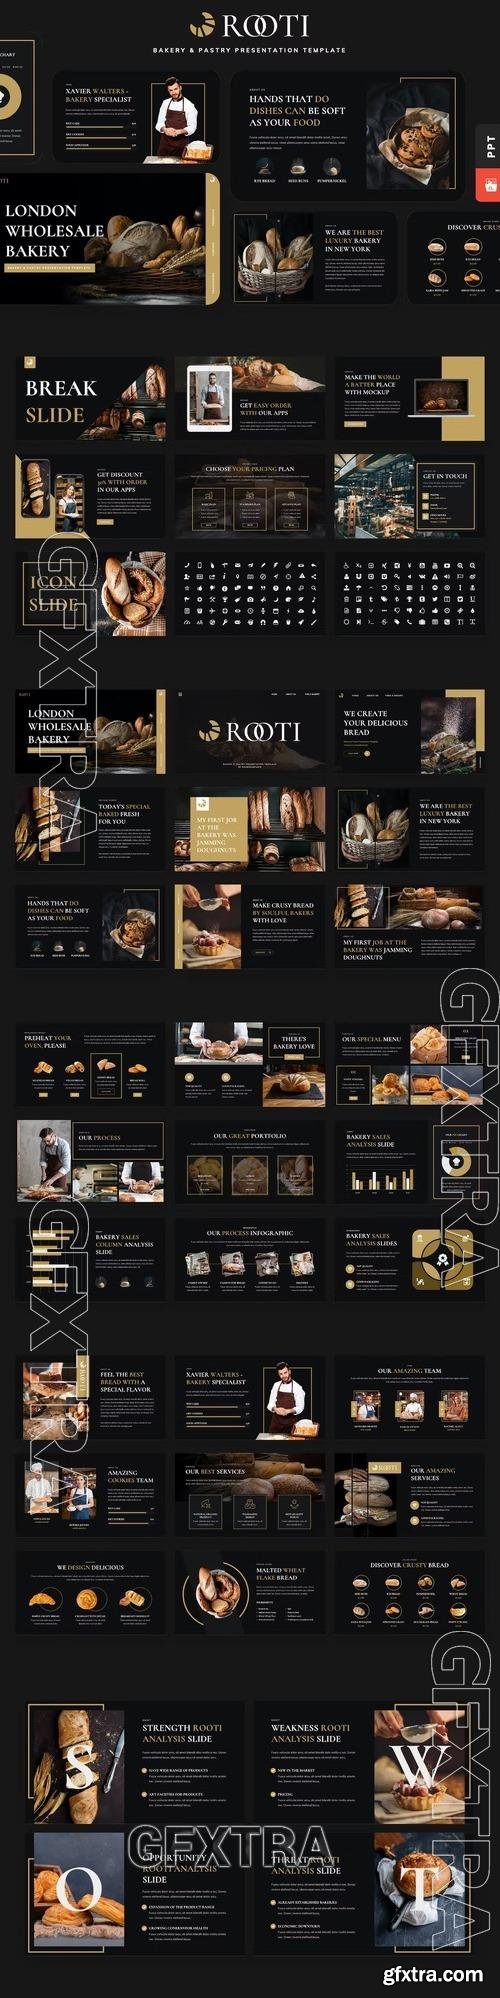 ROOTI - Bakery & Pastry Powerpoint Template B833Q8W